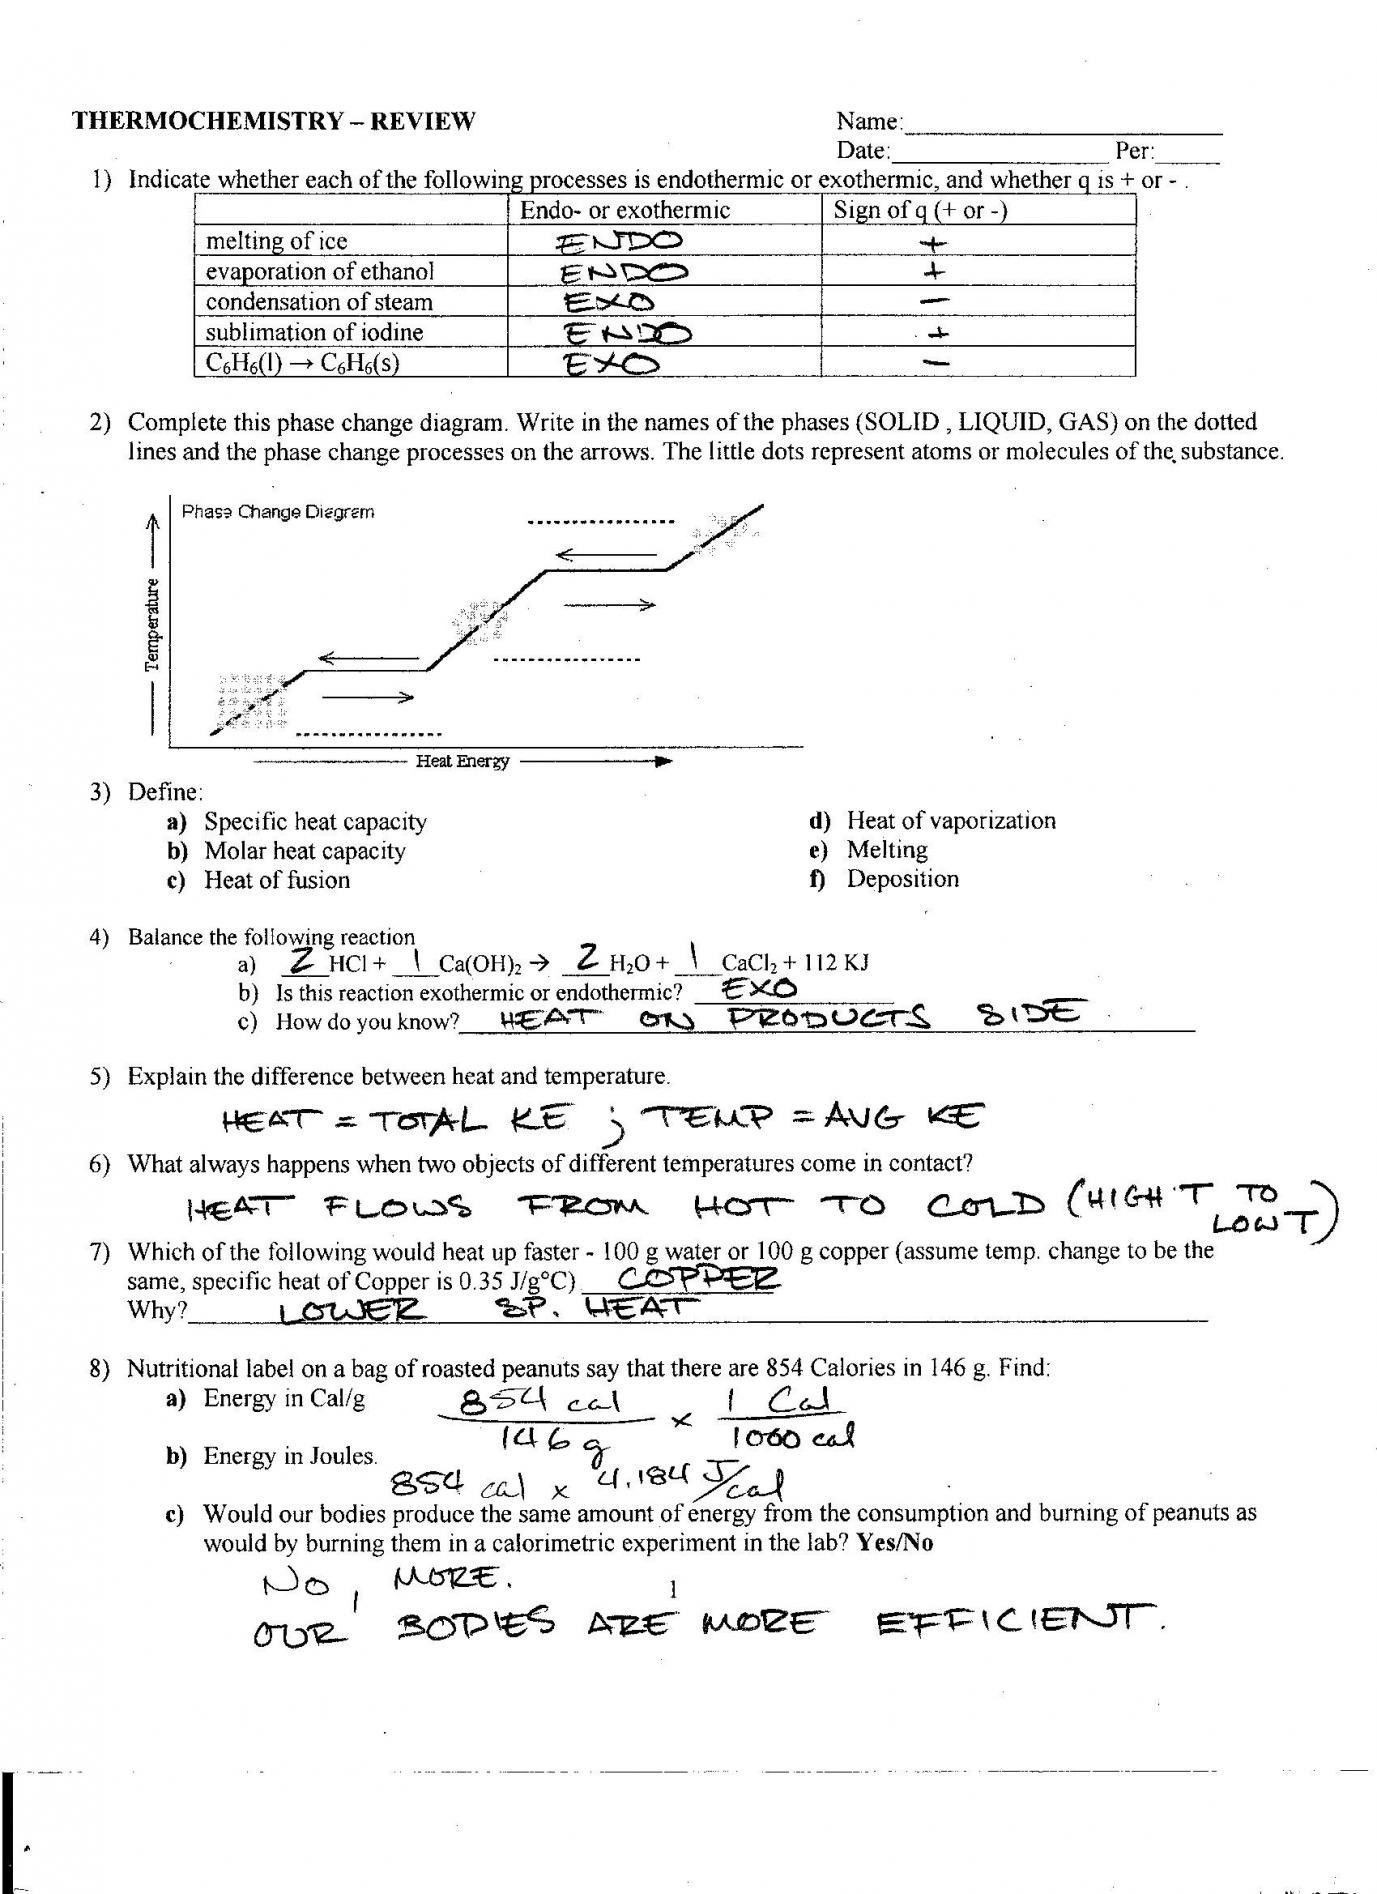 Heating Curve Worksheet Answers Recent Chemistry Heating Curve Worksheet Answers